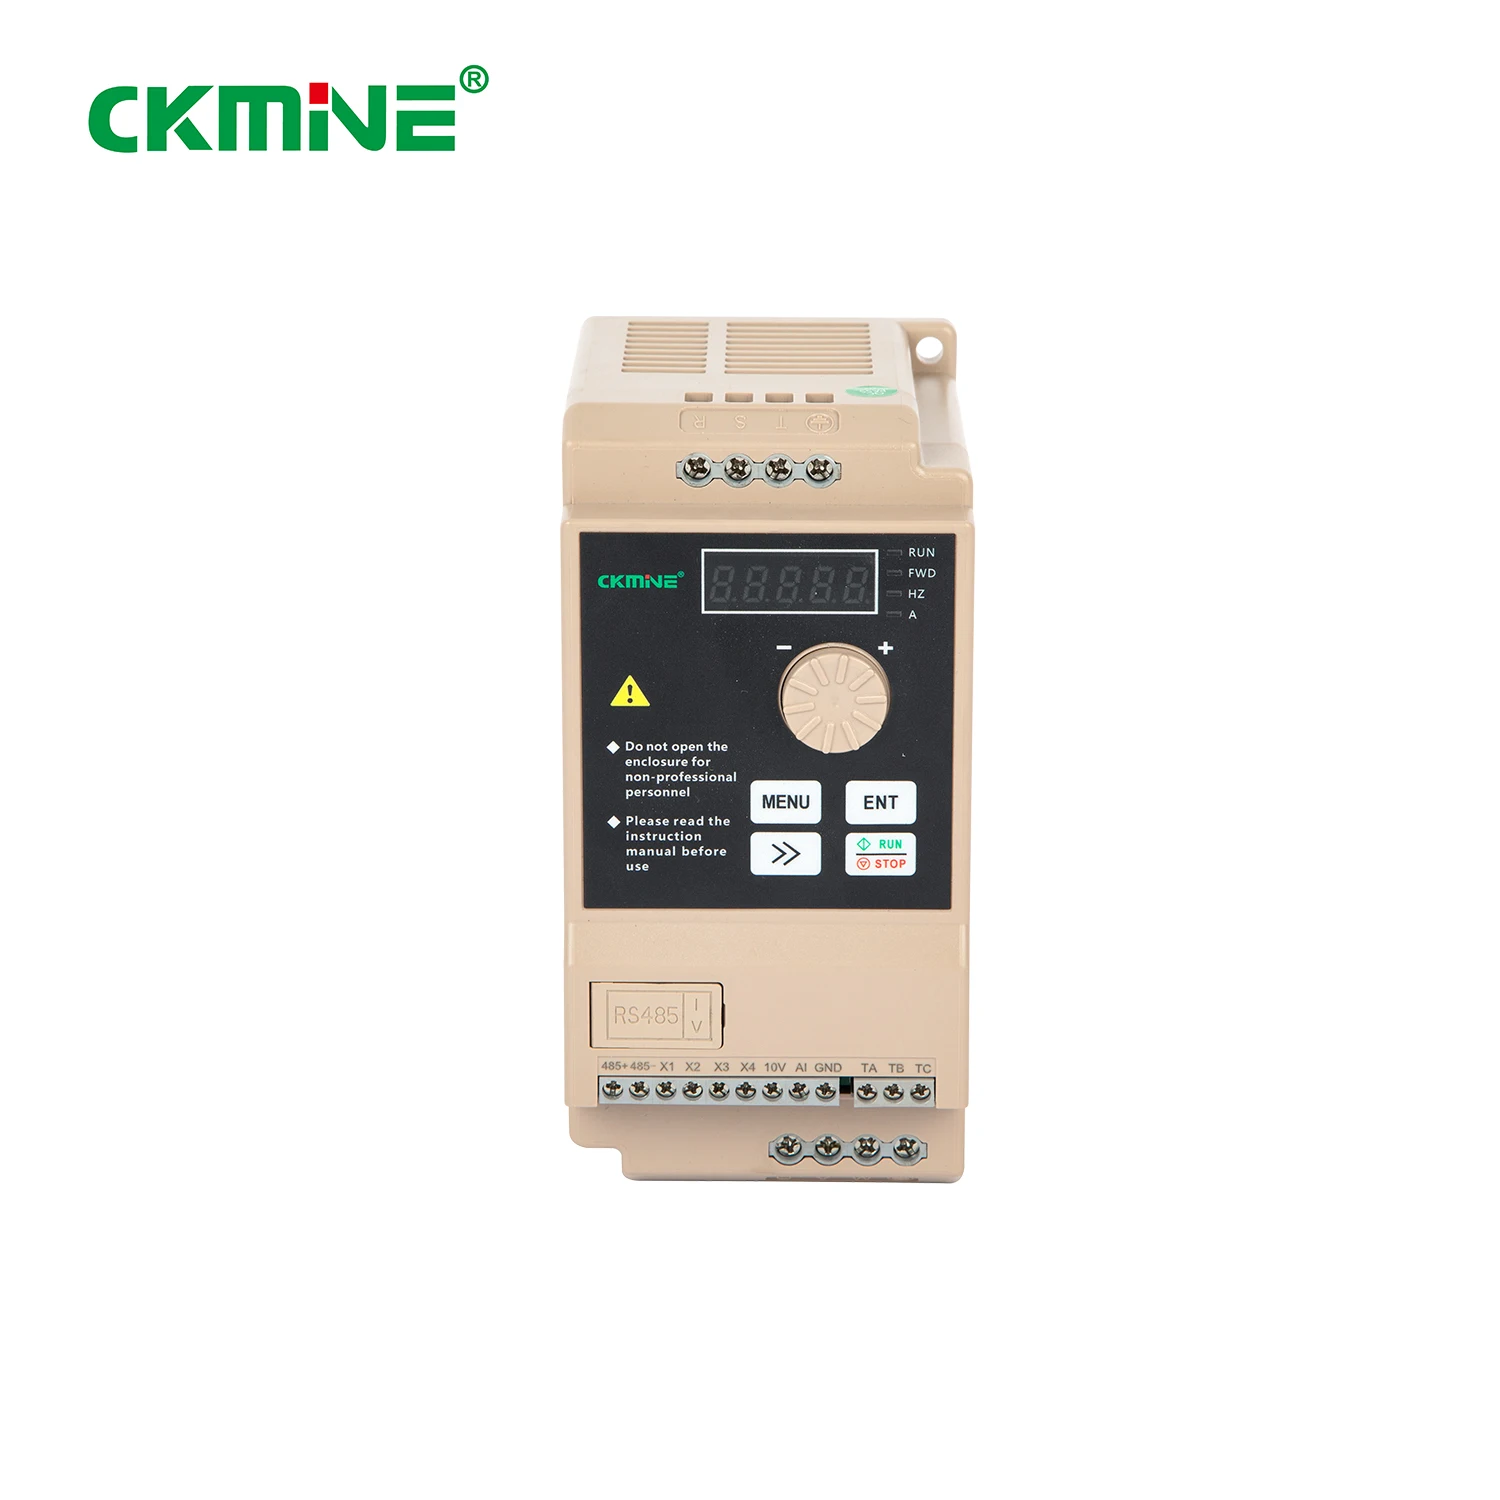 CKMINE General Purpose 3 Phase 220V Low Price VFD Inverter 1.5kW 2HP Variable Frequency Drive AC 50hz to 60hz for Motor Control